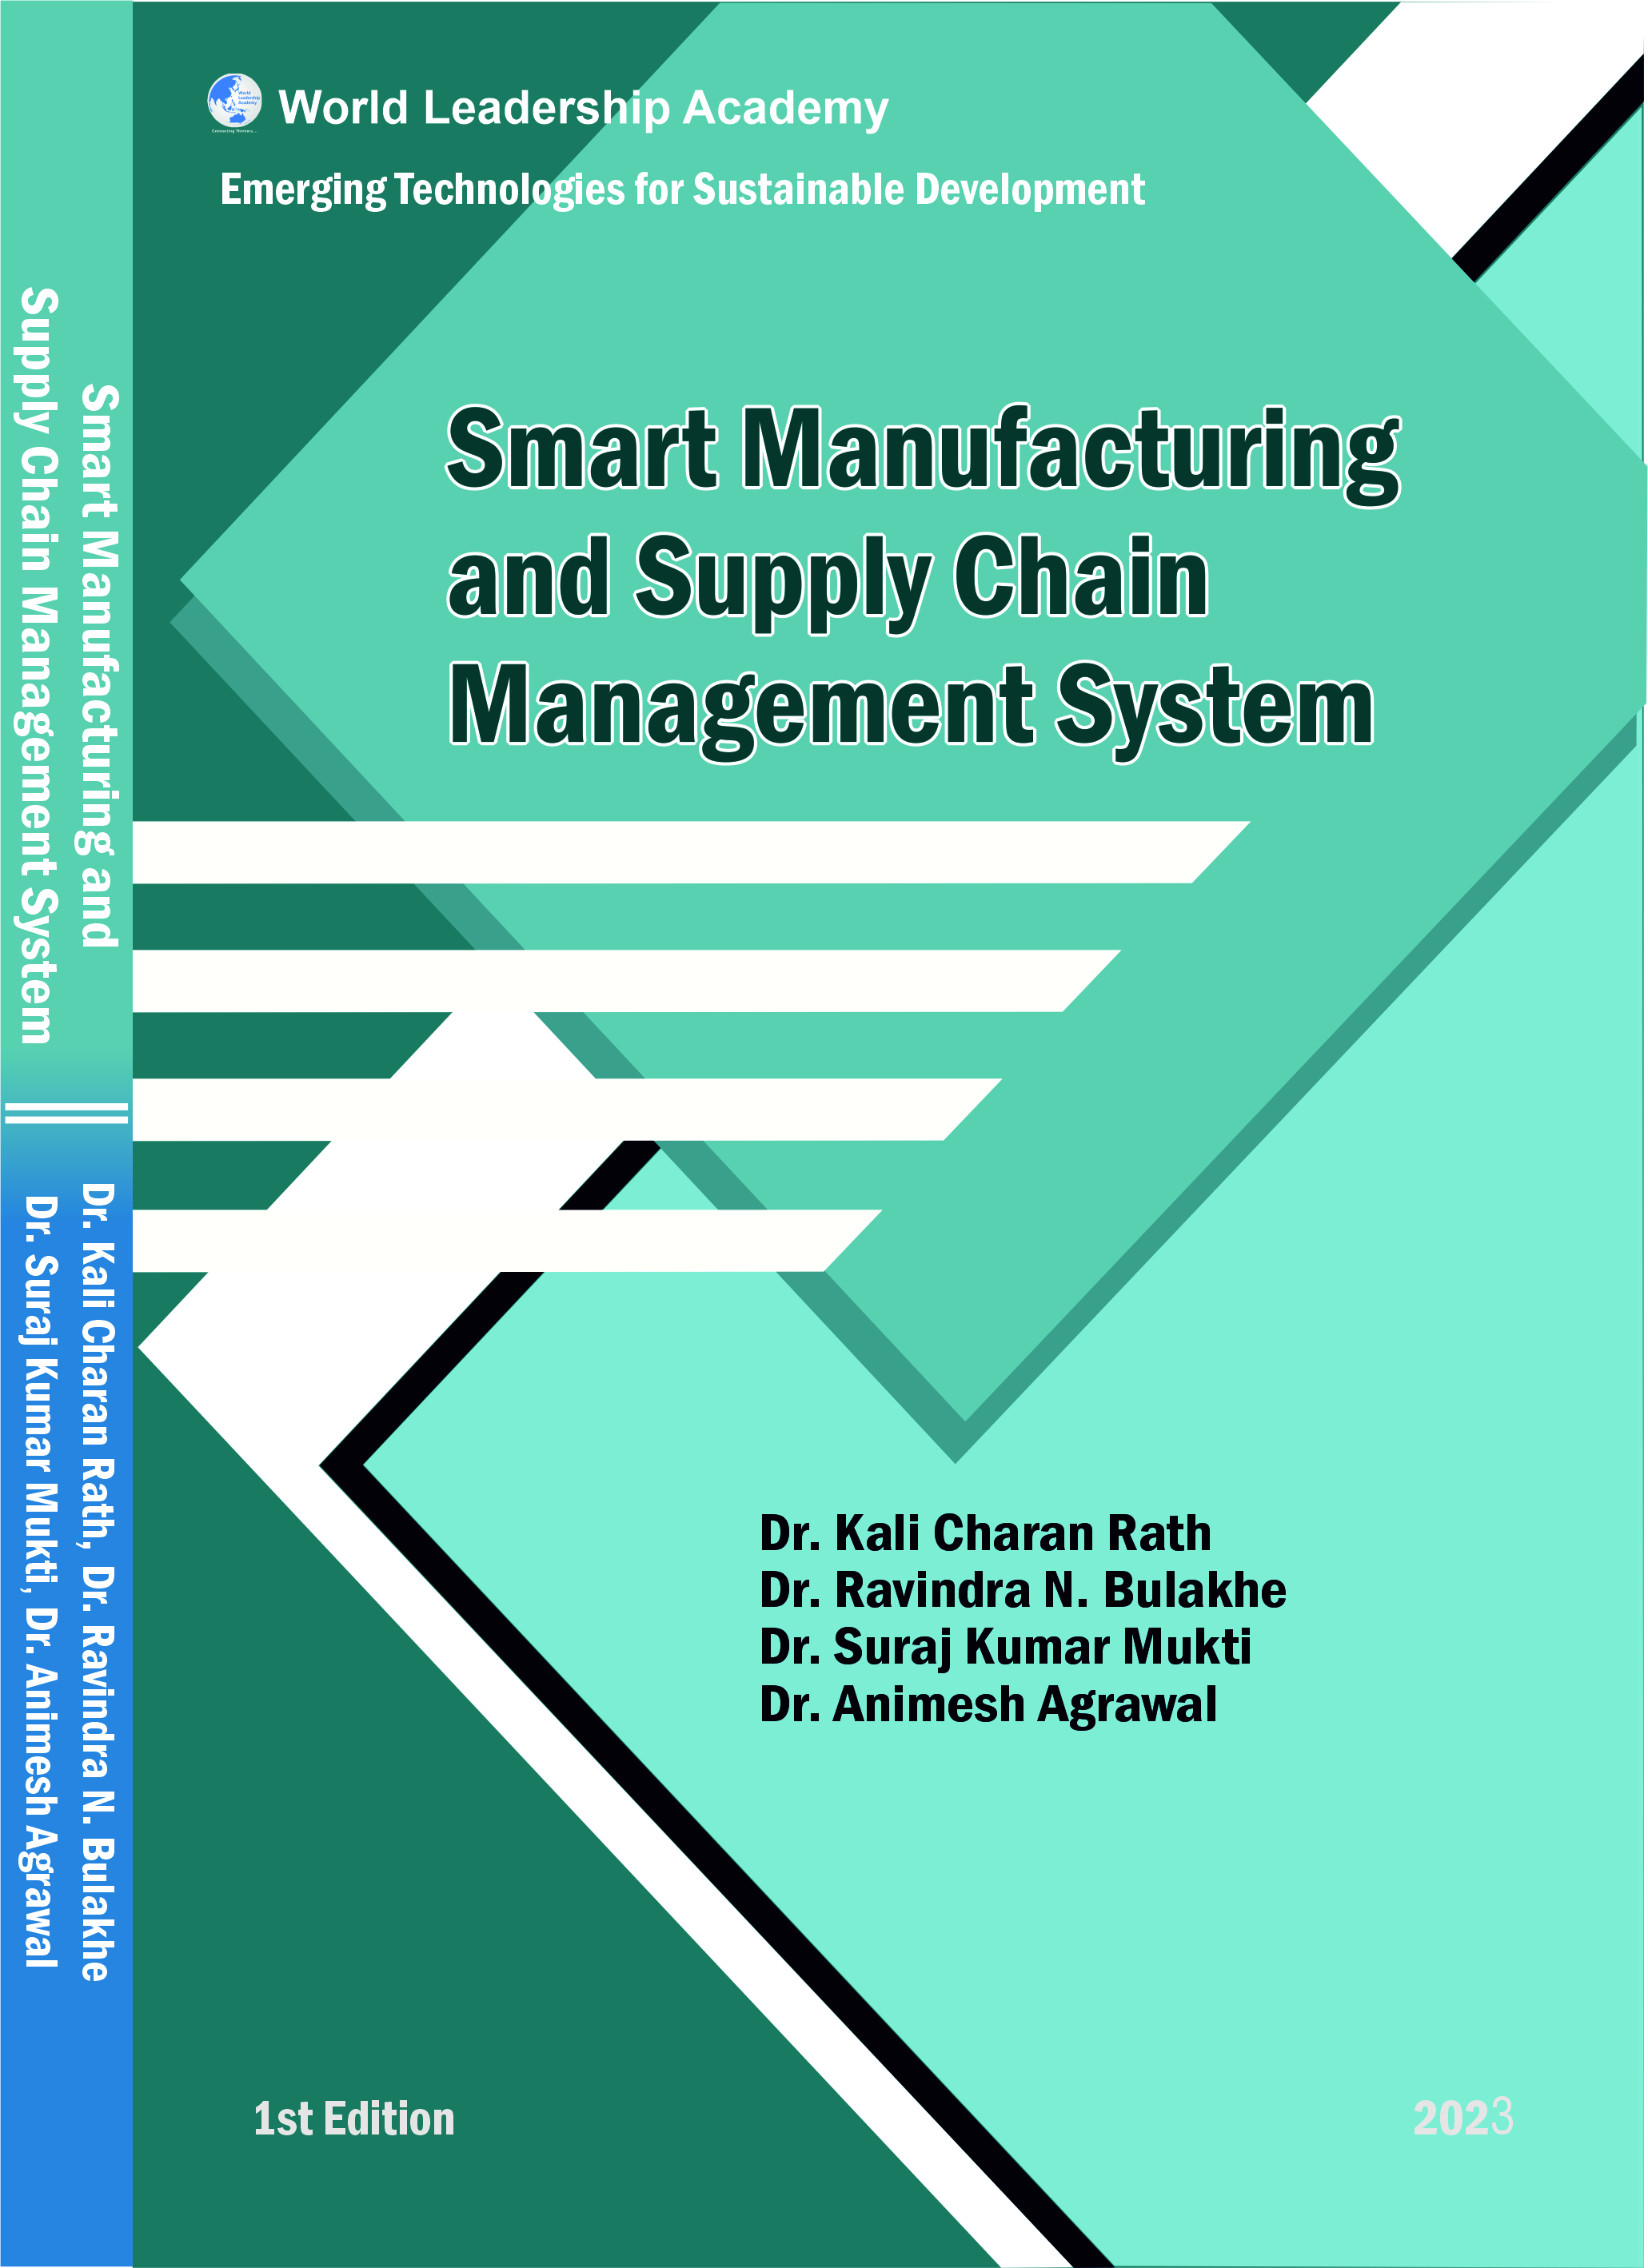 Smart Manufacturing and Supply Chain Management System